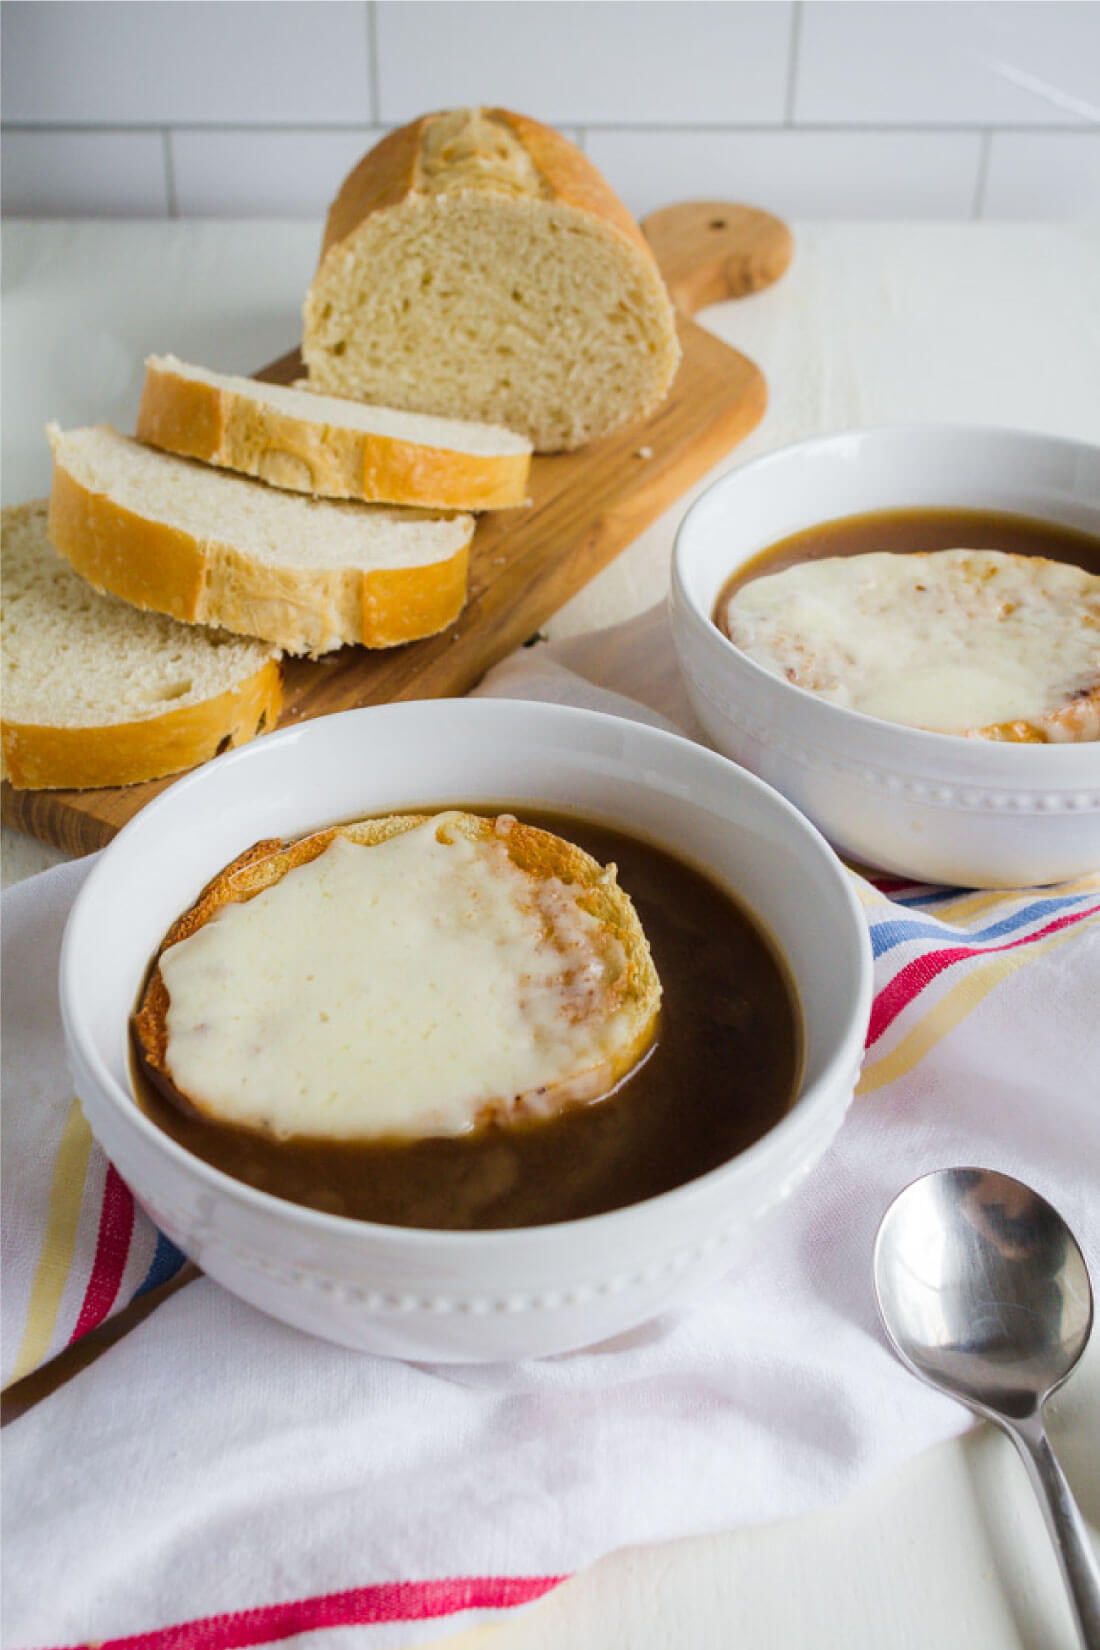 Crockpot French Onion Soup - it's time to whip out your crockpot and make one of your favorite soups!